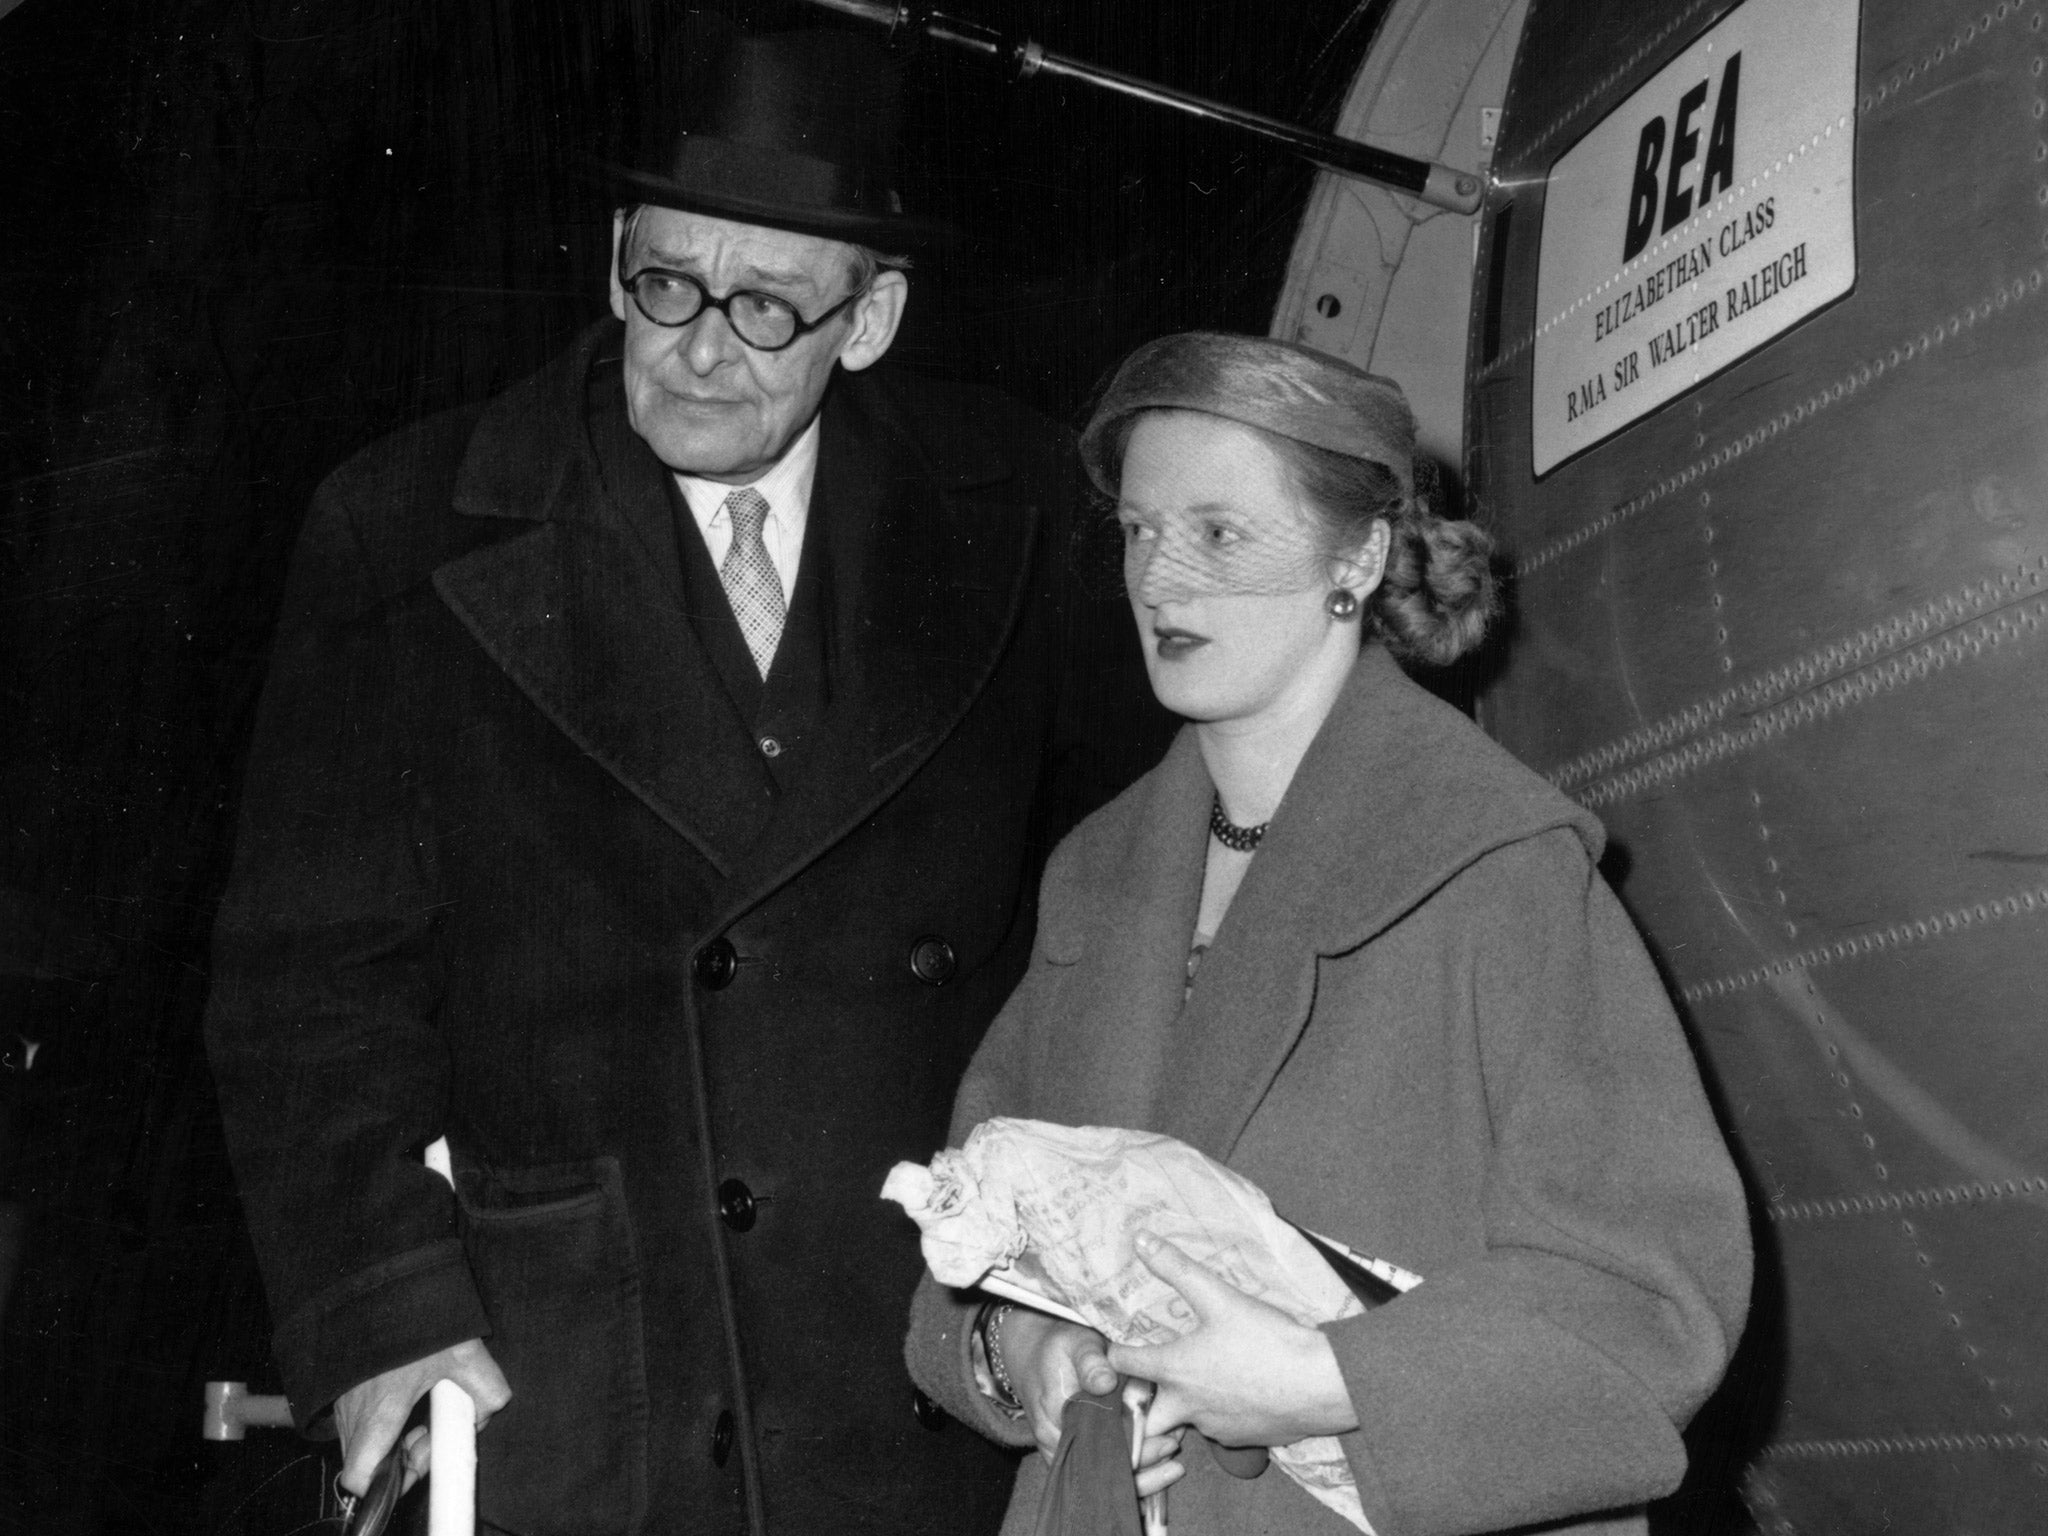 Poet and dramatist TS Eliot with Valerie in 1957